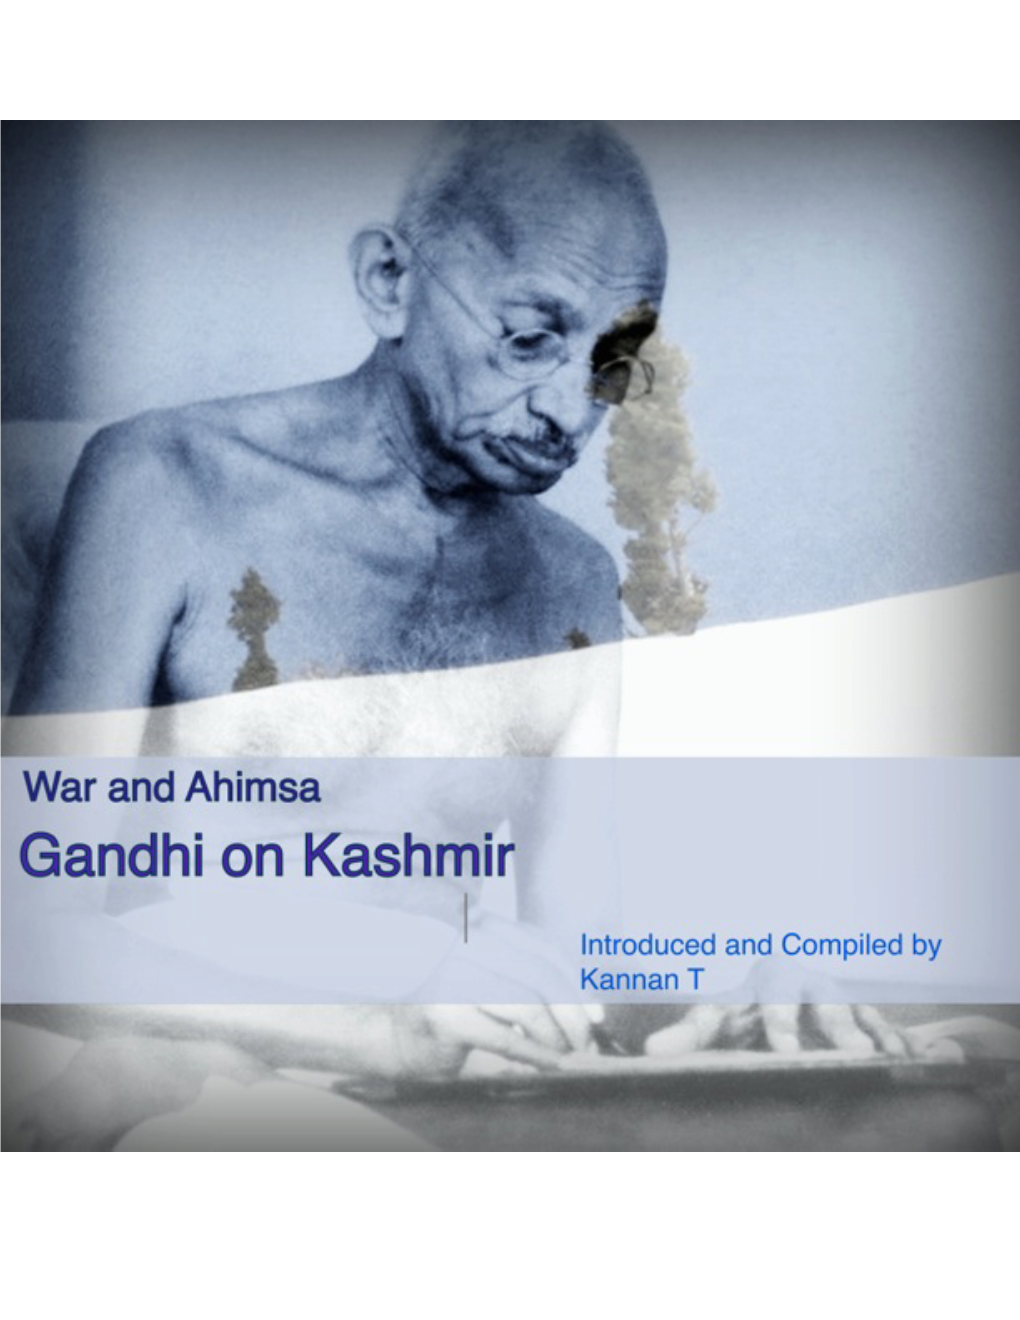 Gandhi on Kashmir� � � � Introduced and Compiled by Kannan T! � � � � � � � � � � � � � � � � � Ebook Published by Kannan T, Coimbatore August, 2020 � Contents